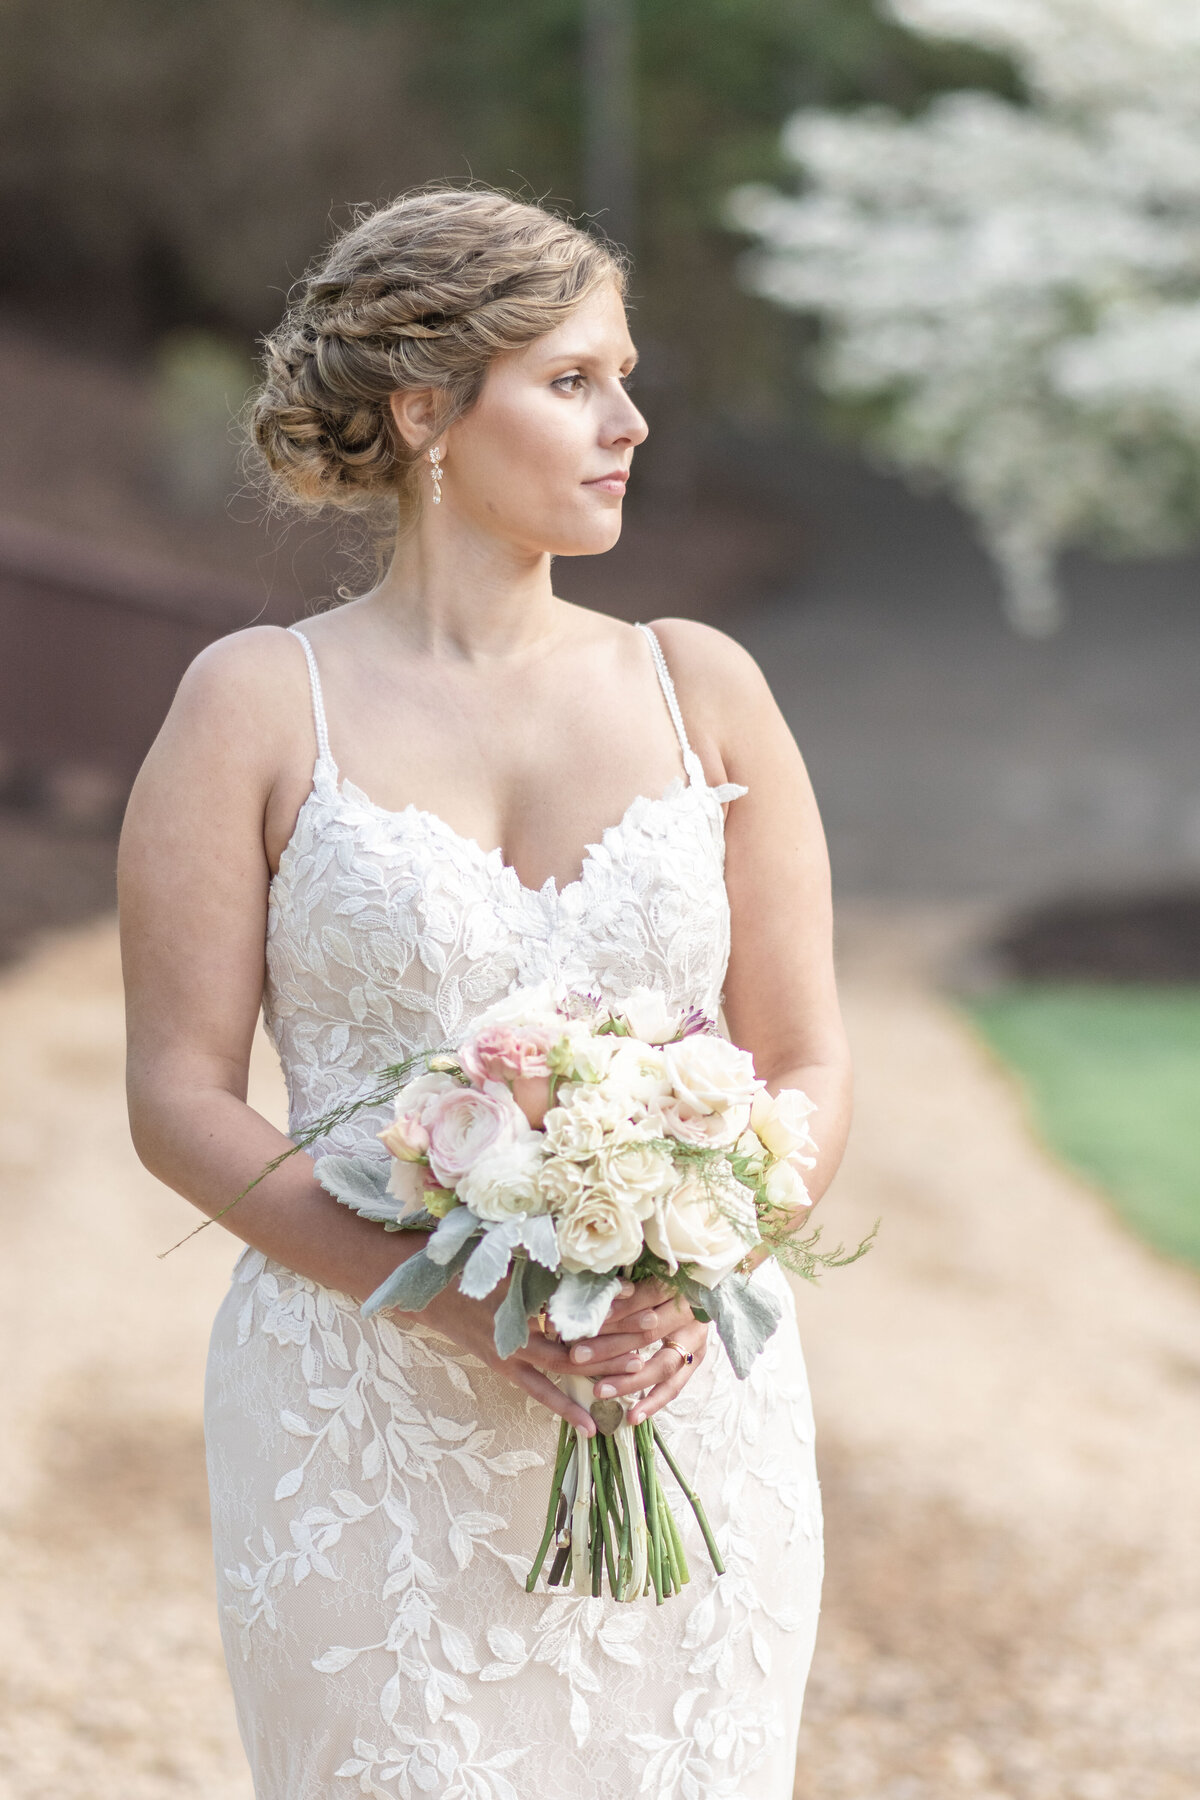 Beautiful bride holding her bouquet